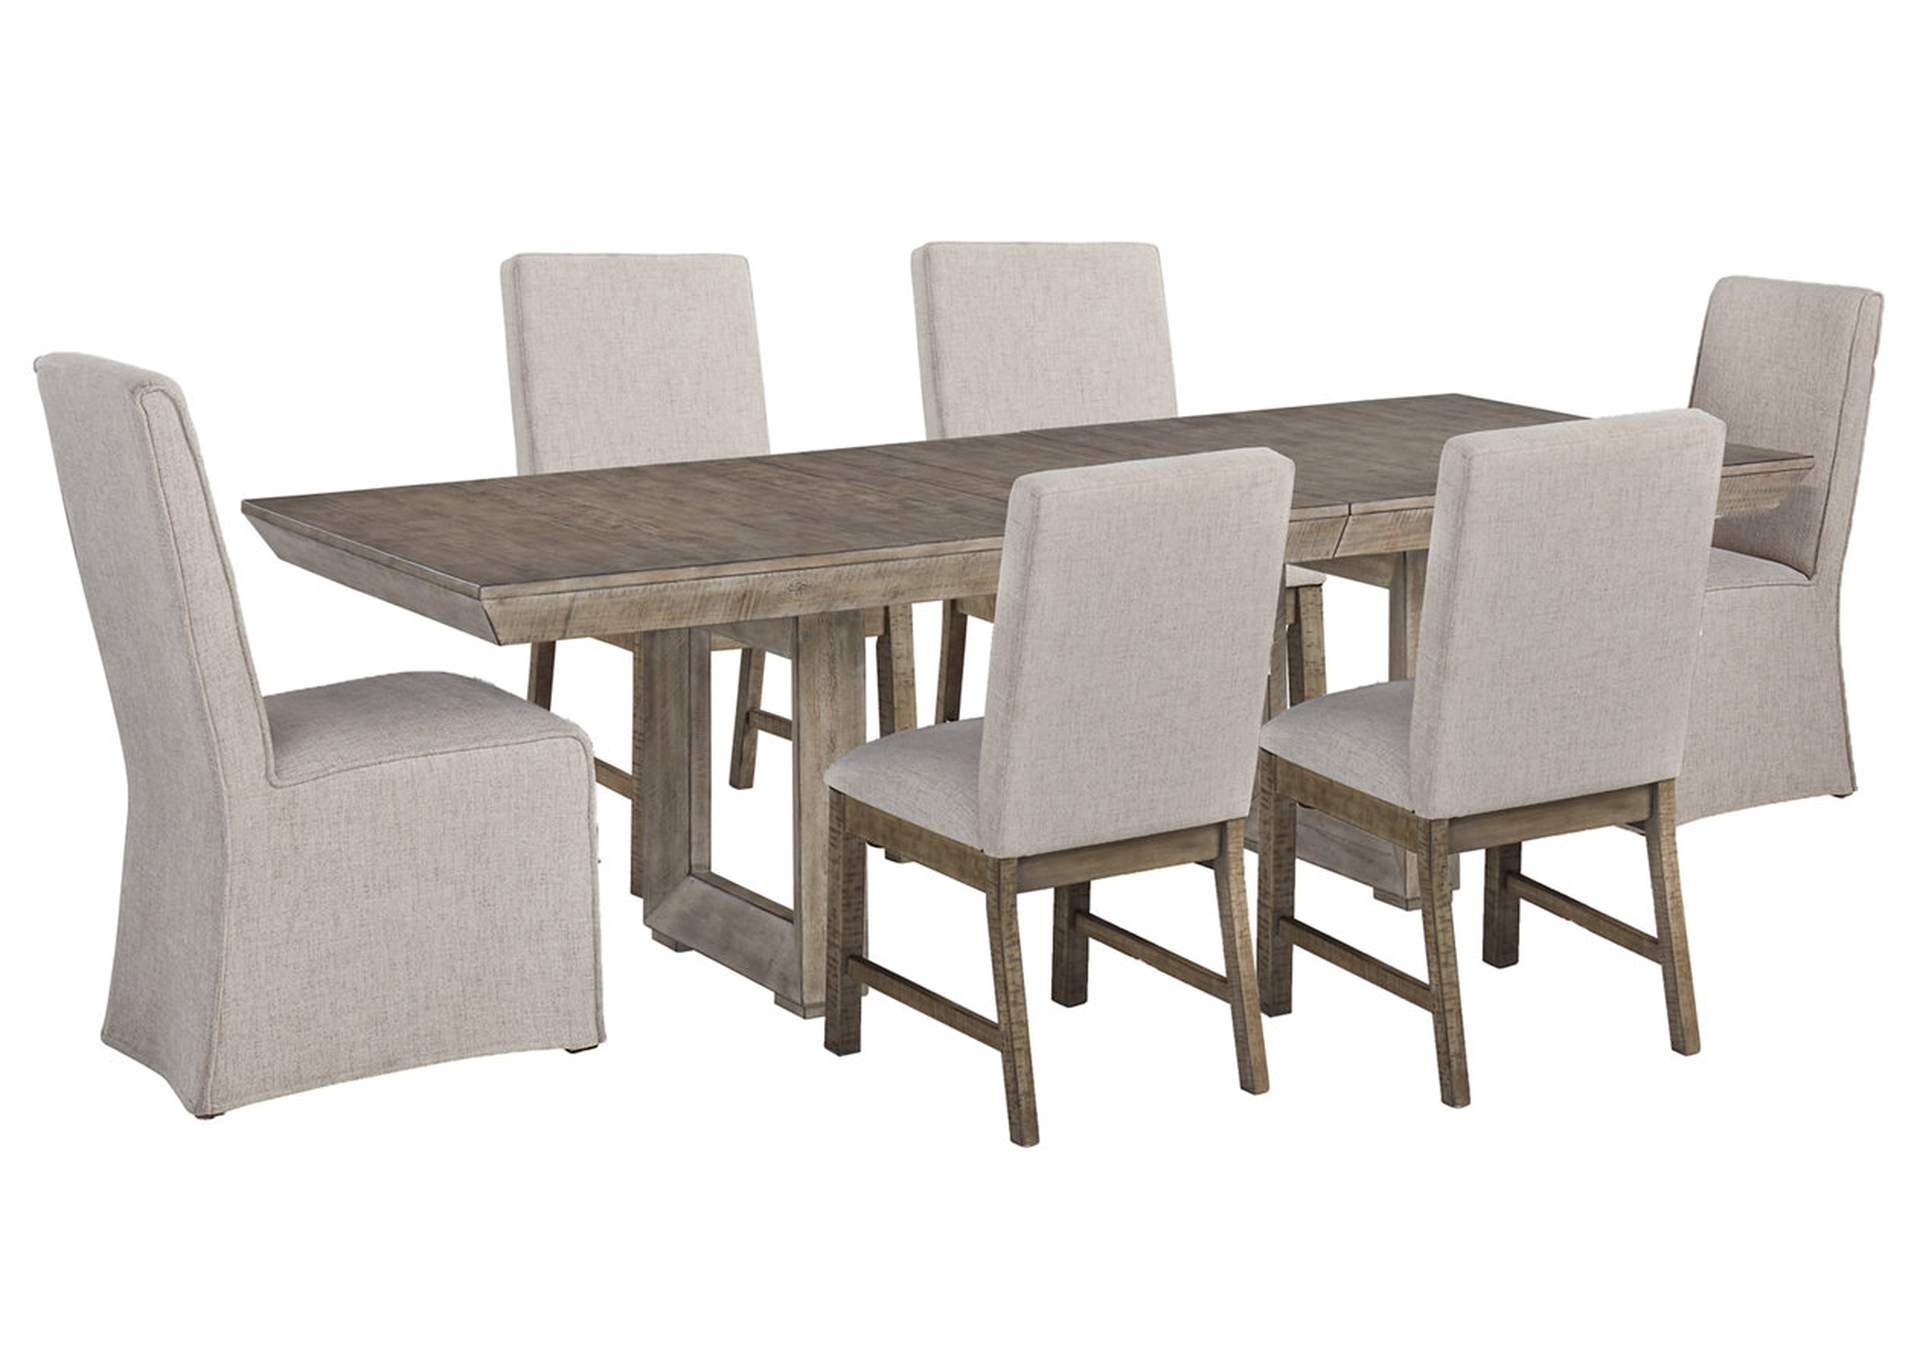 Langford Dining Table and 6 Chairs,Millennium